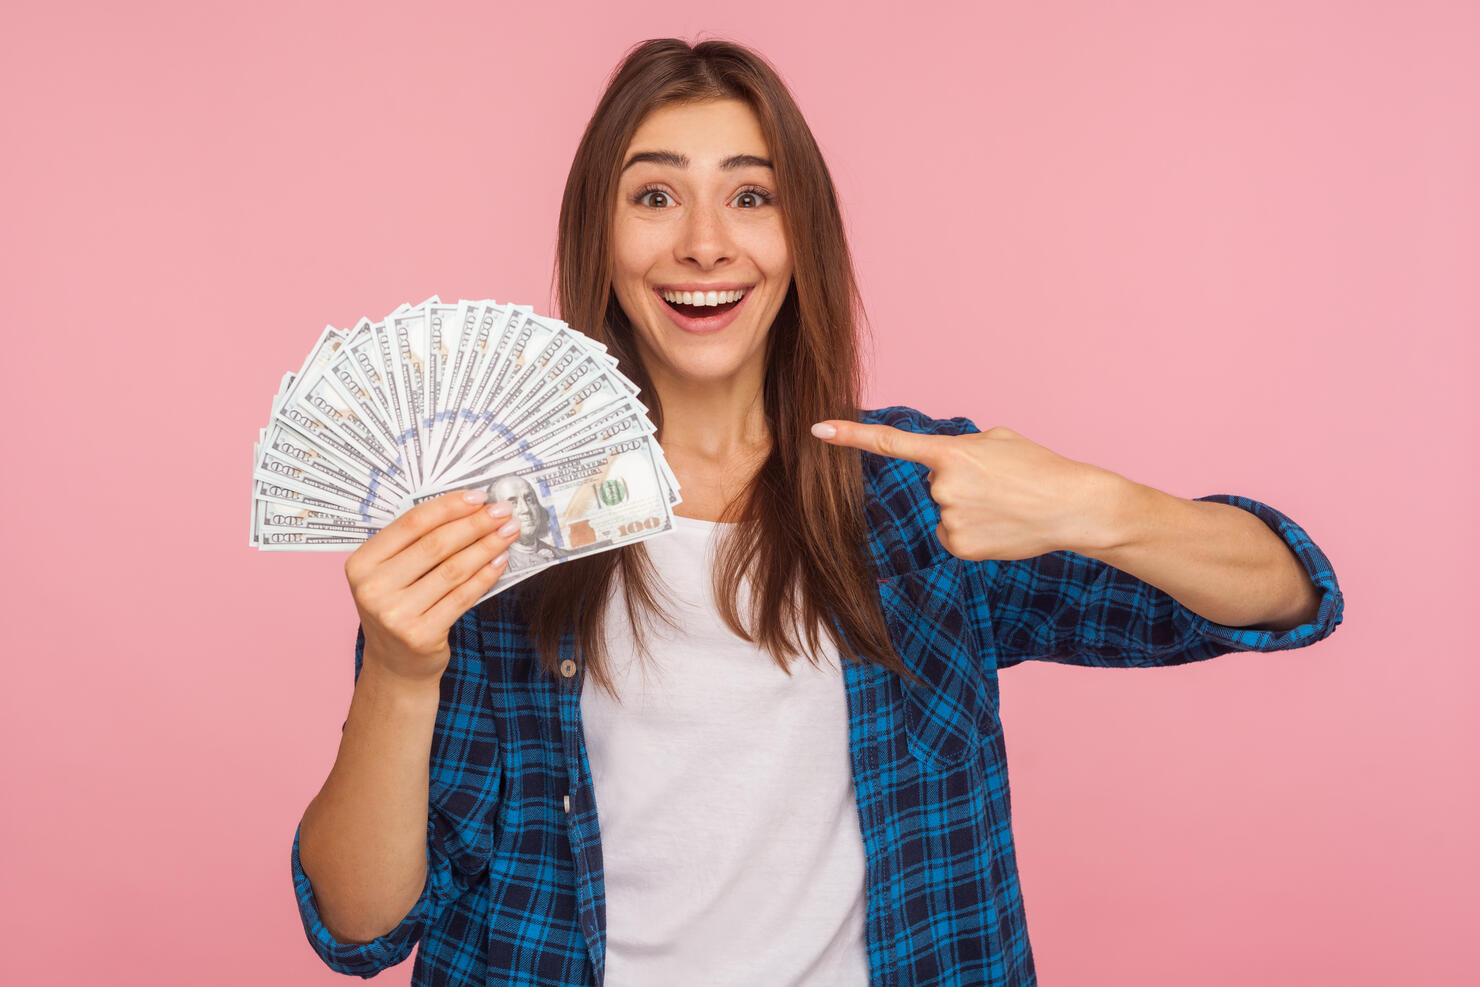 Portrait of joyful lucky girl in casual shirt happy to hold lot of money, pointing at dollar bills in hand and smiling